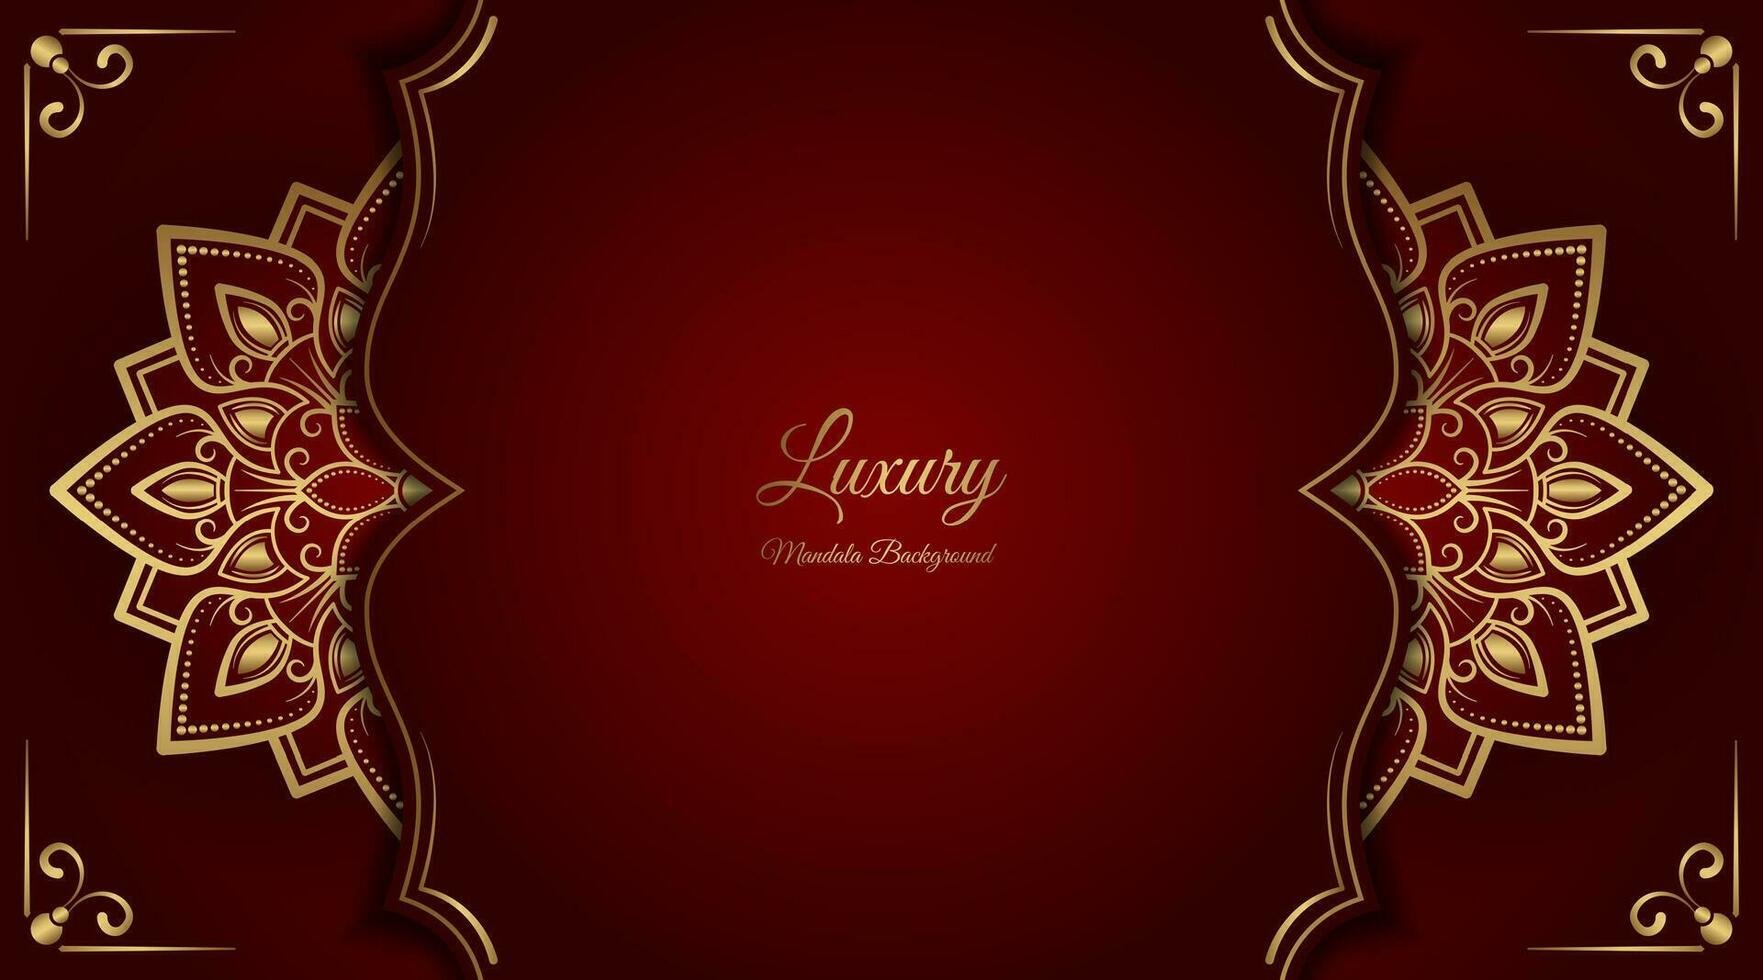 Red luxury background  with mandala ornament vector